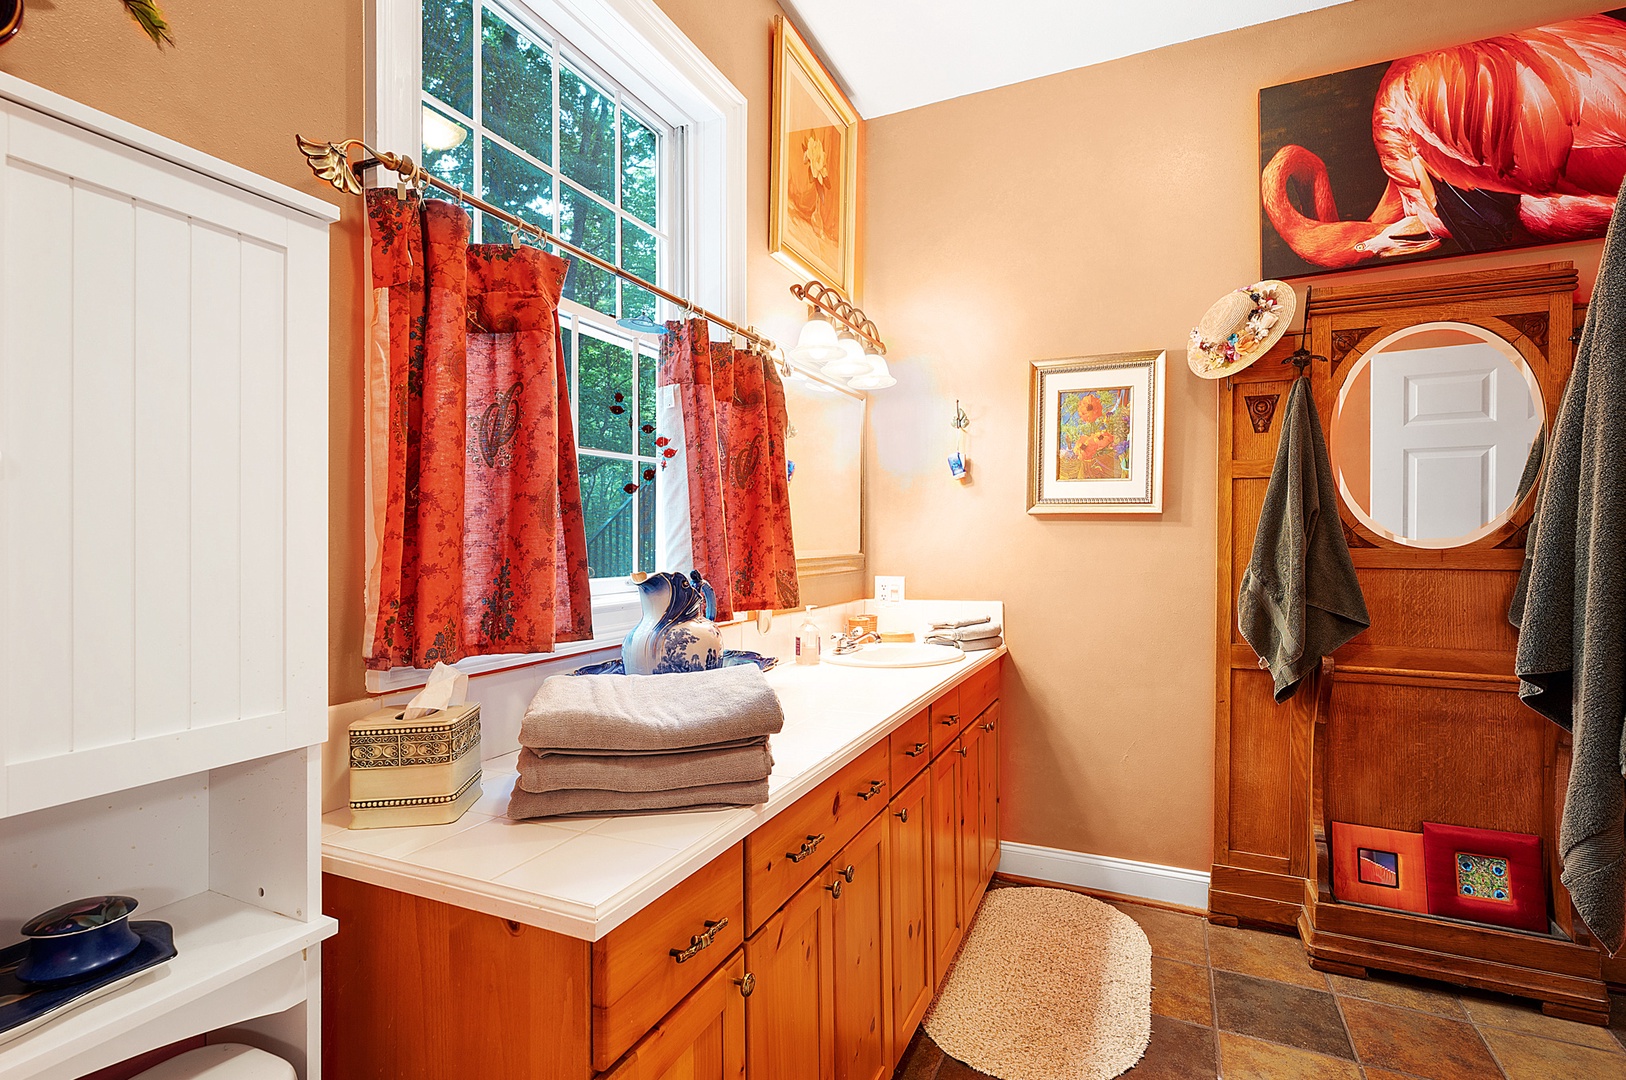 The House on the Hill: Lower Level Shared Bathroom